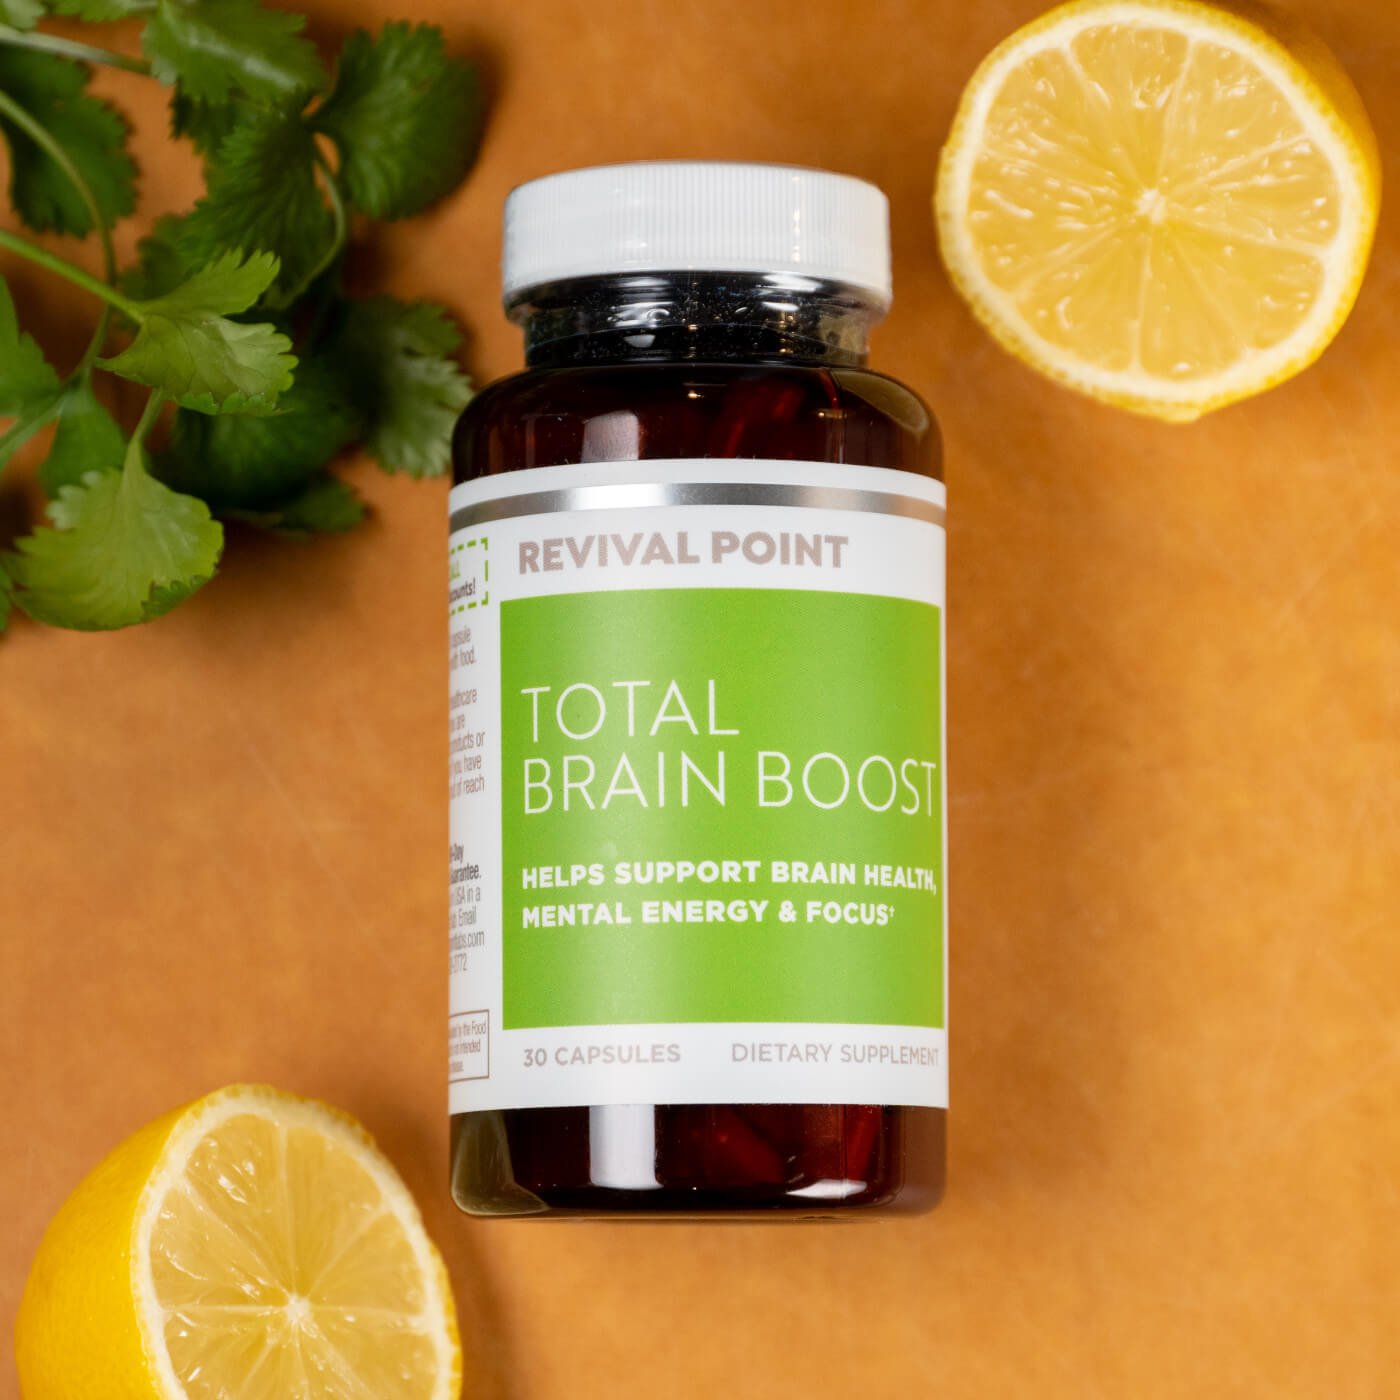 The Science Behind Total Brain Boost's Ingredients & How It Helps with Brain Health